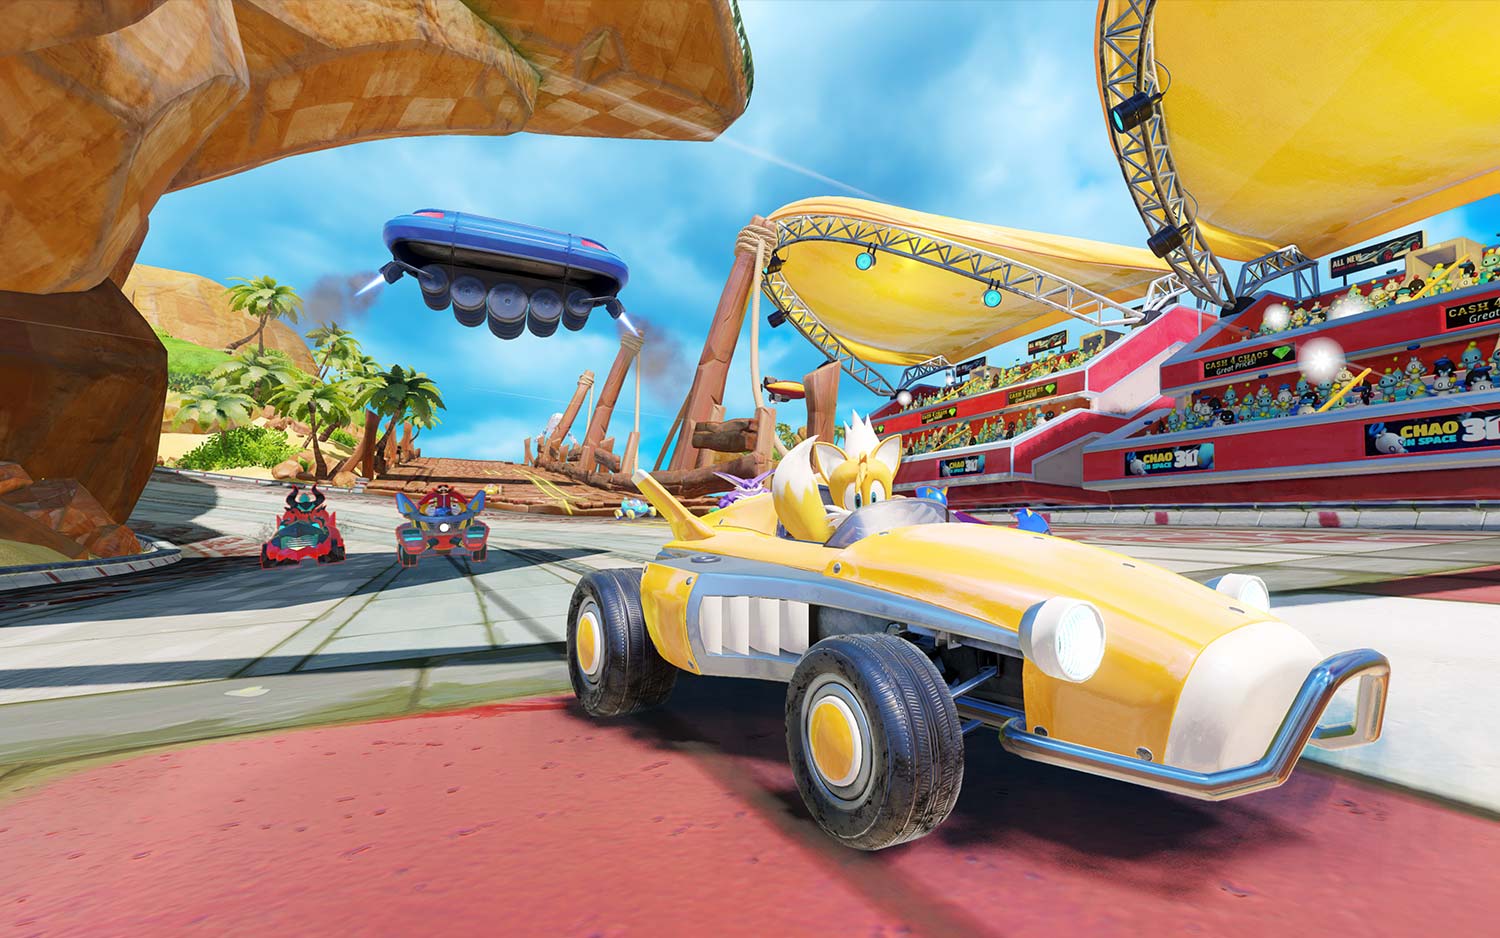 Vergissing Lionel Green Street Passend Team Sonic Racing Review: A Fun But Fleeting Budget Racer | Tom's Guide